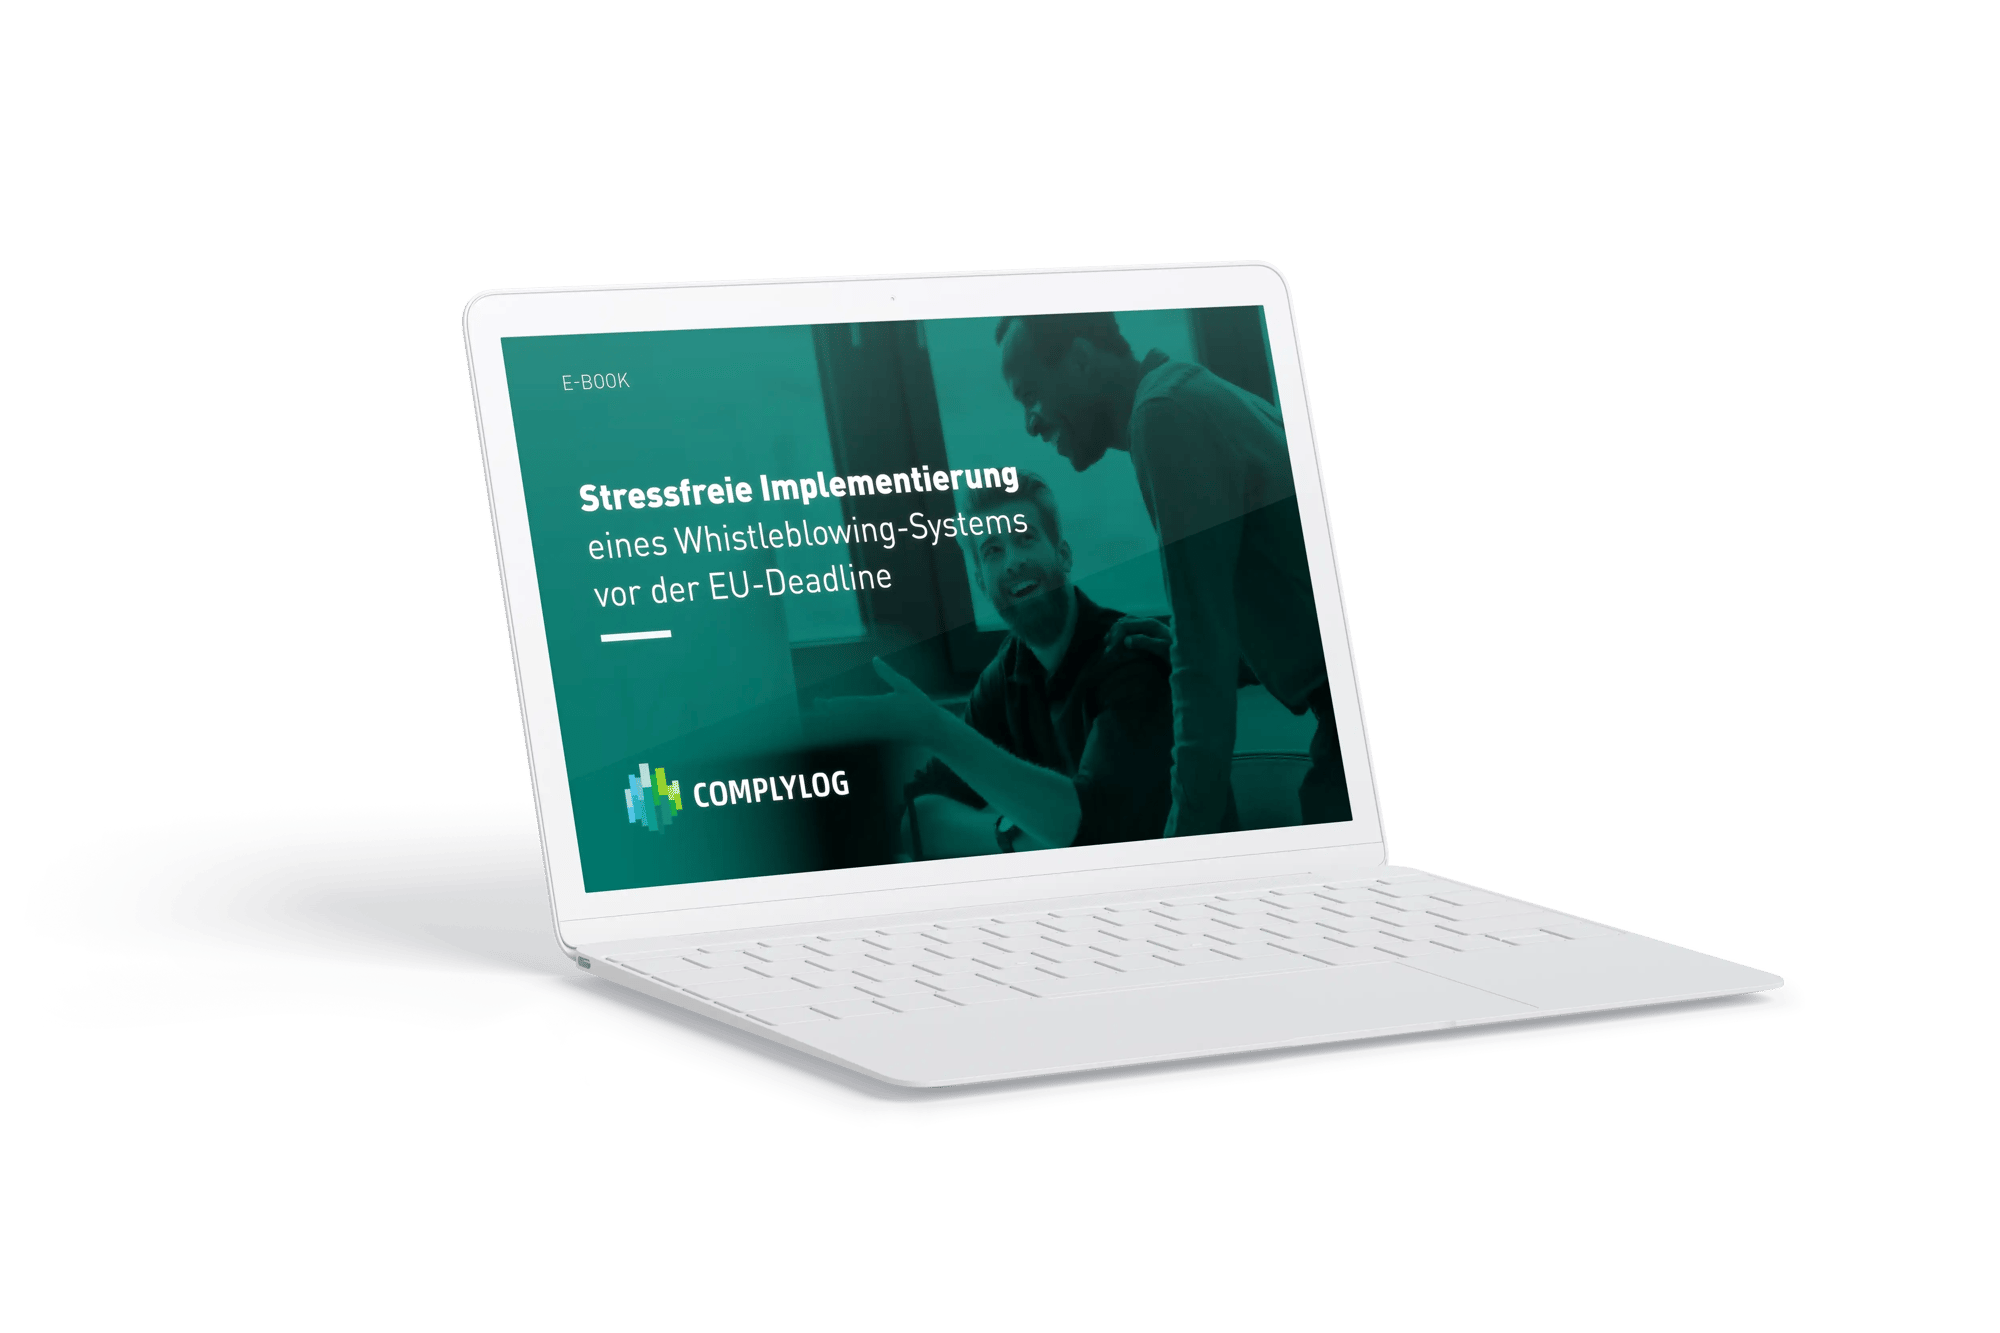 2022 06 28 - IntegrityLog - mockup ebook - Stress-Free Guide to Implementing a Whistleblowing System [DE]